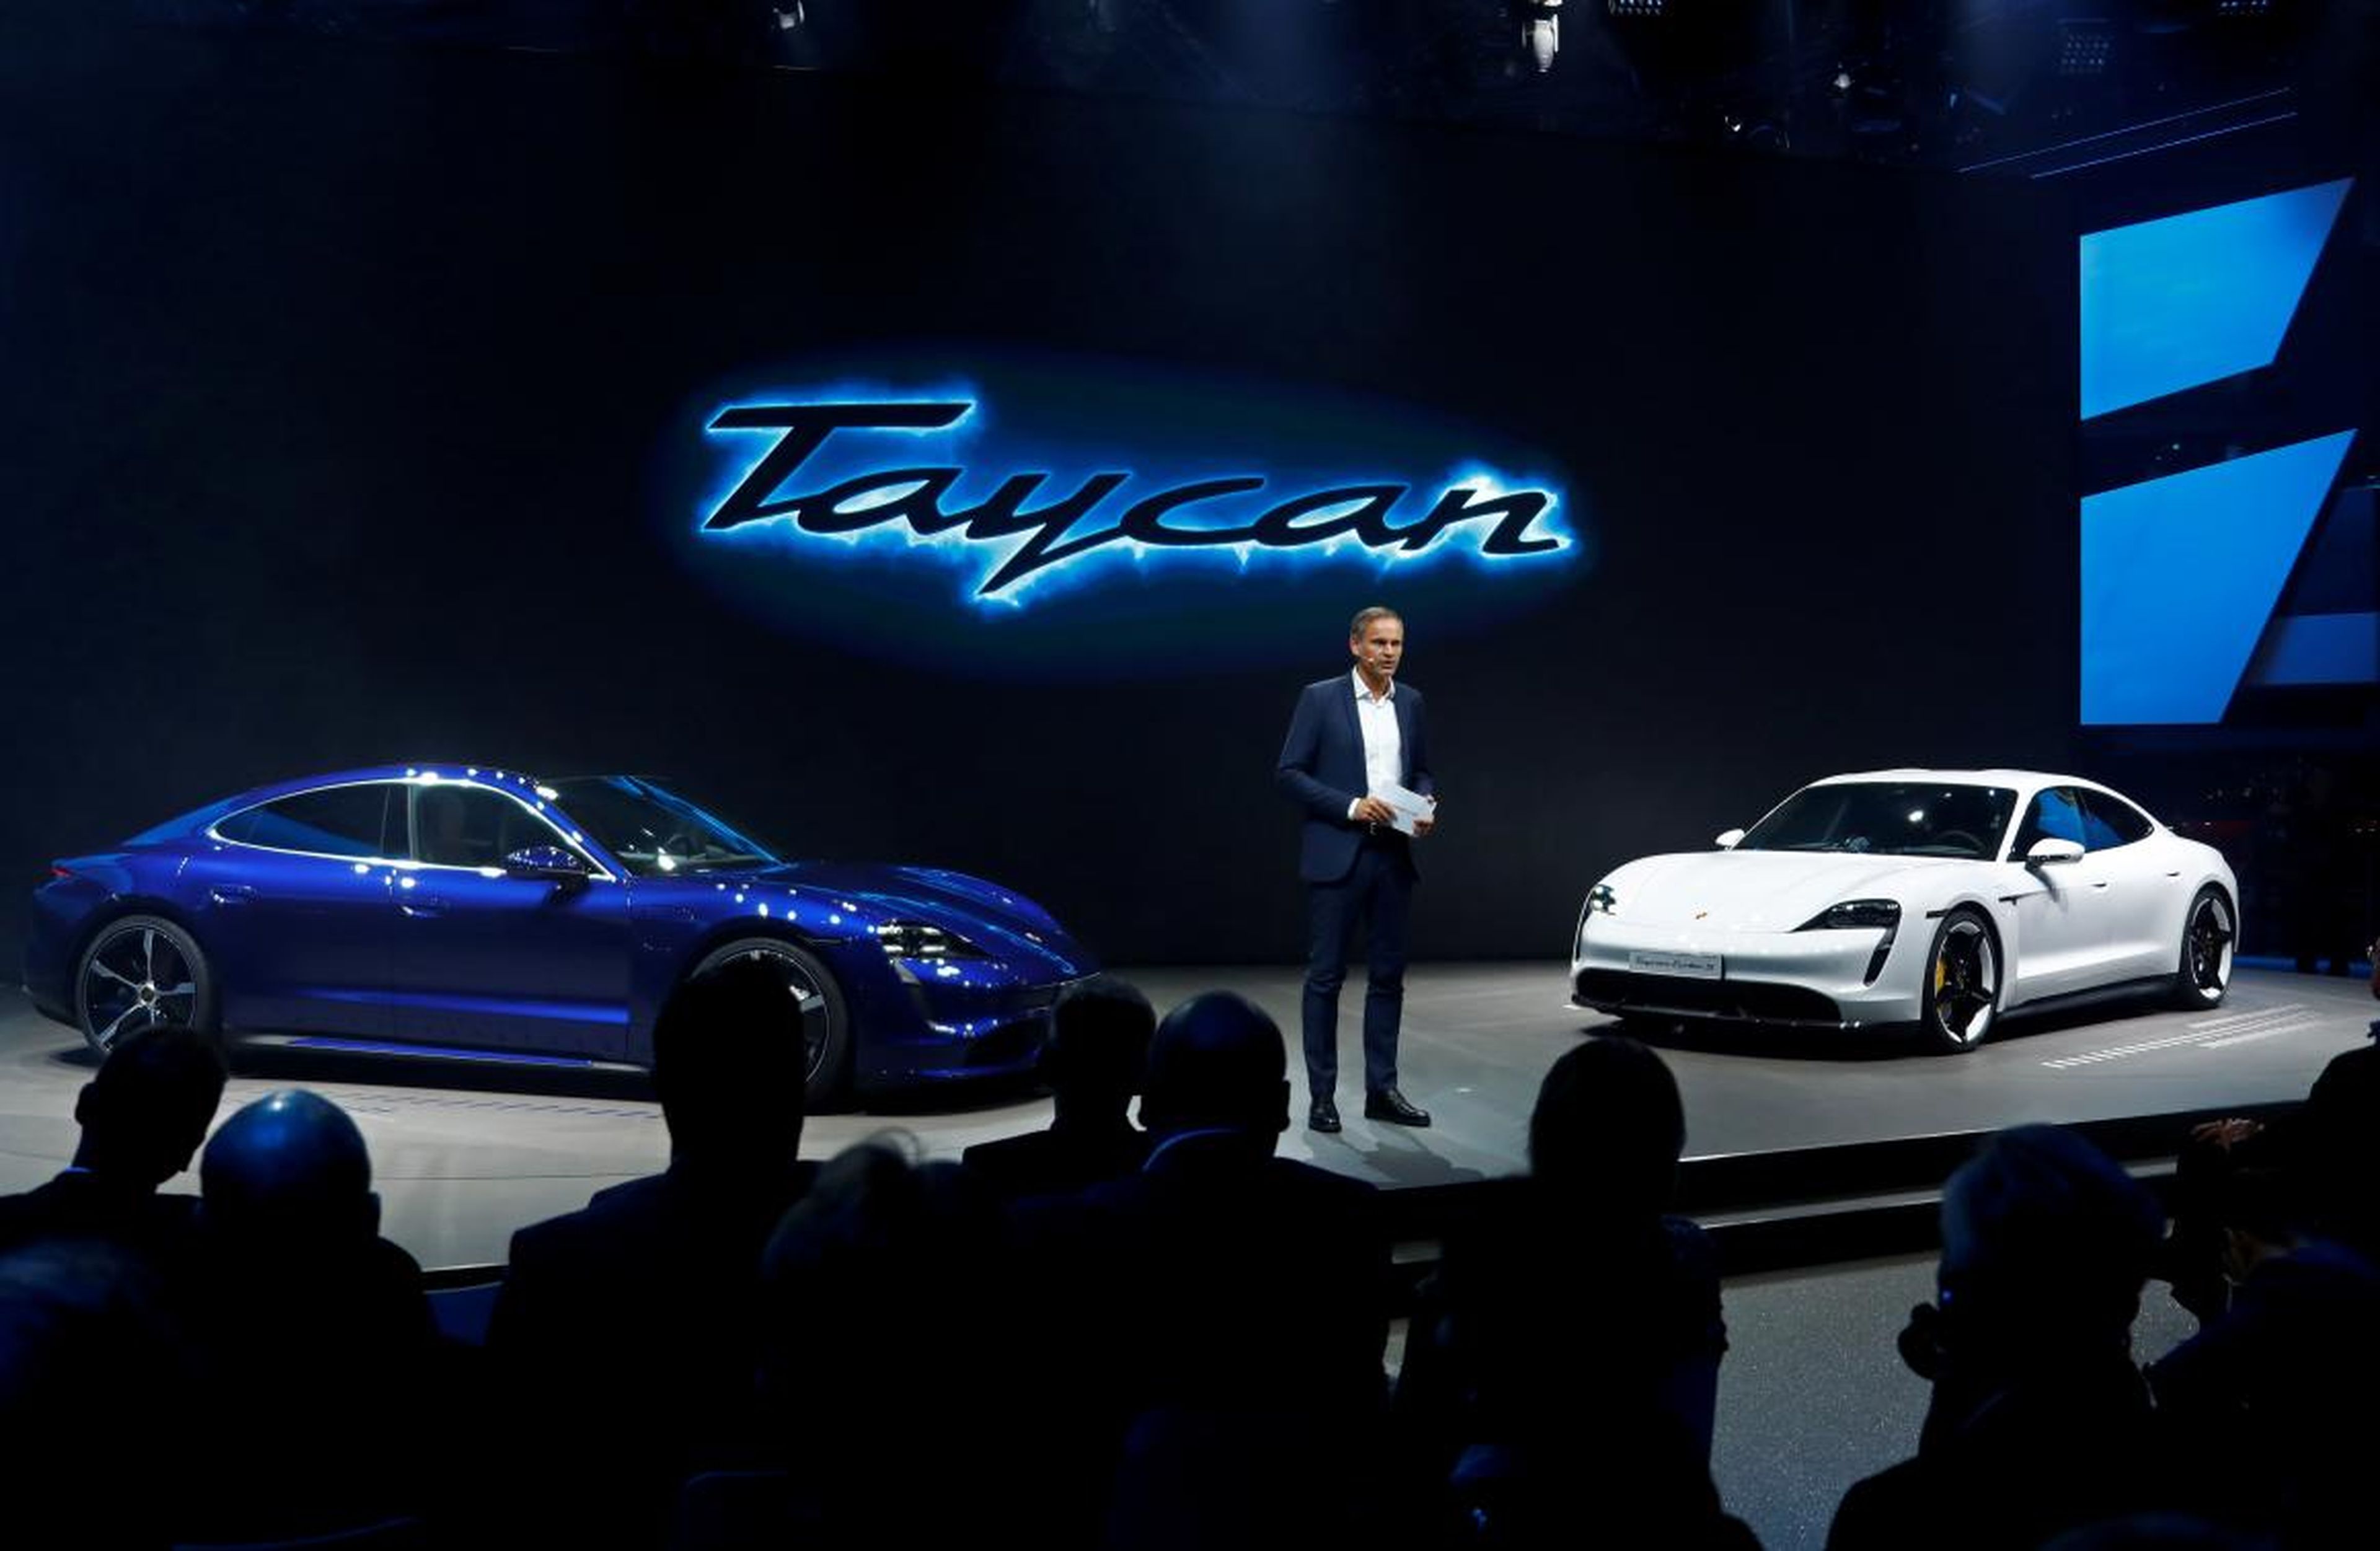 Porsche's hotly expected Taycan all-electric sedan was revealed at three different locations prior to Frankfurt, but Frankfurt attendees saw the innovative machine on the show floor. It should be the star of the Porsche booth.